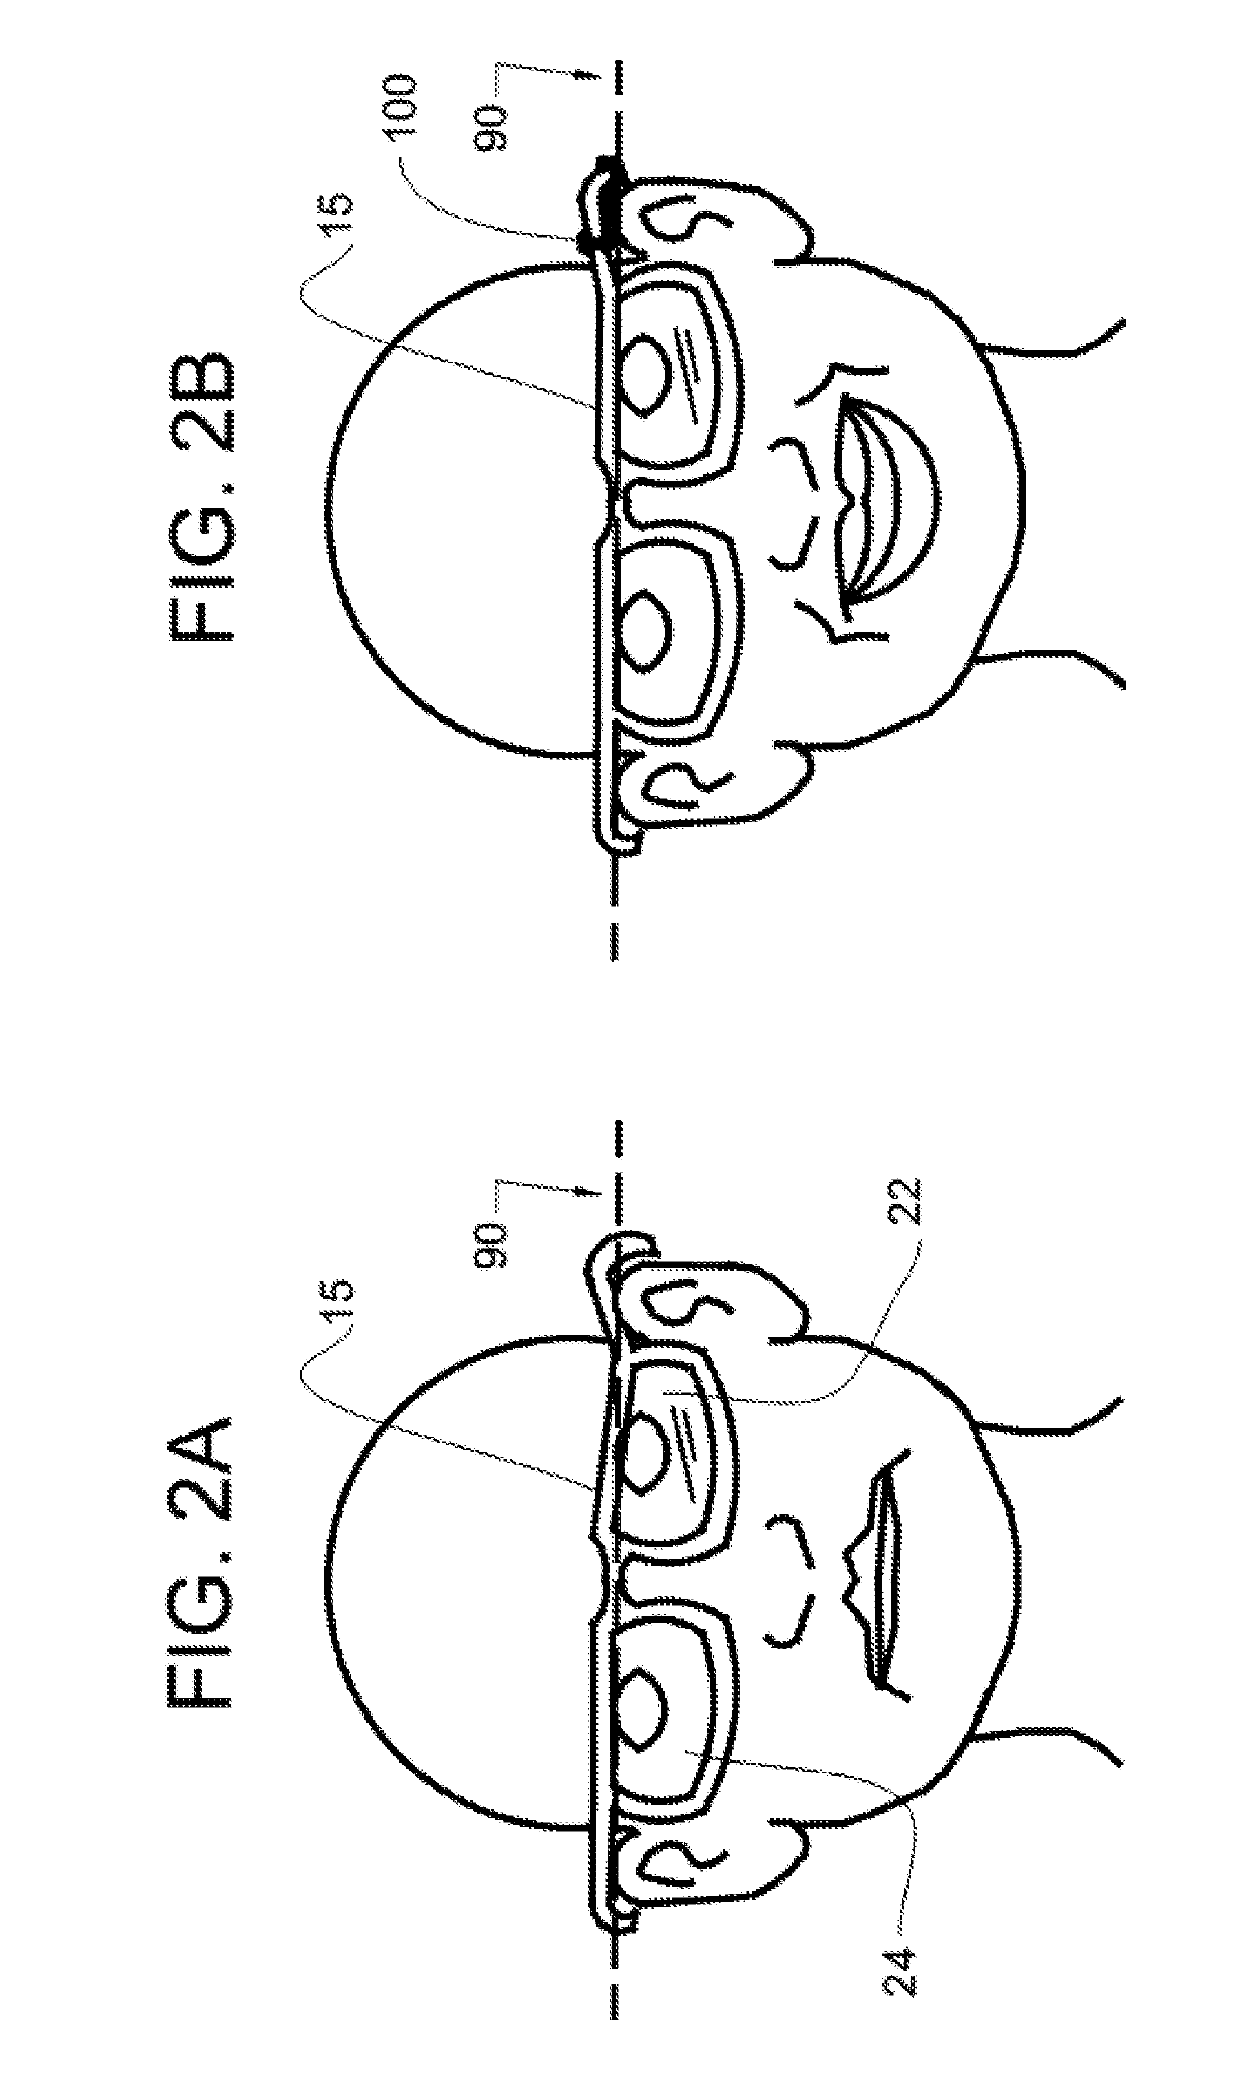 Attachment for Straightening Eyeglasses and for Holding Devices or Fashionwear